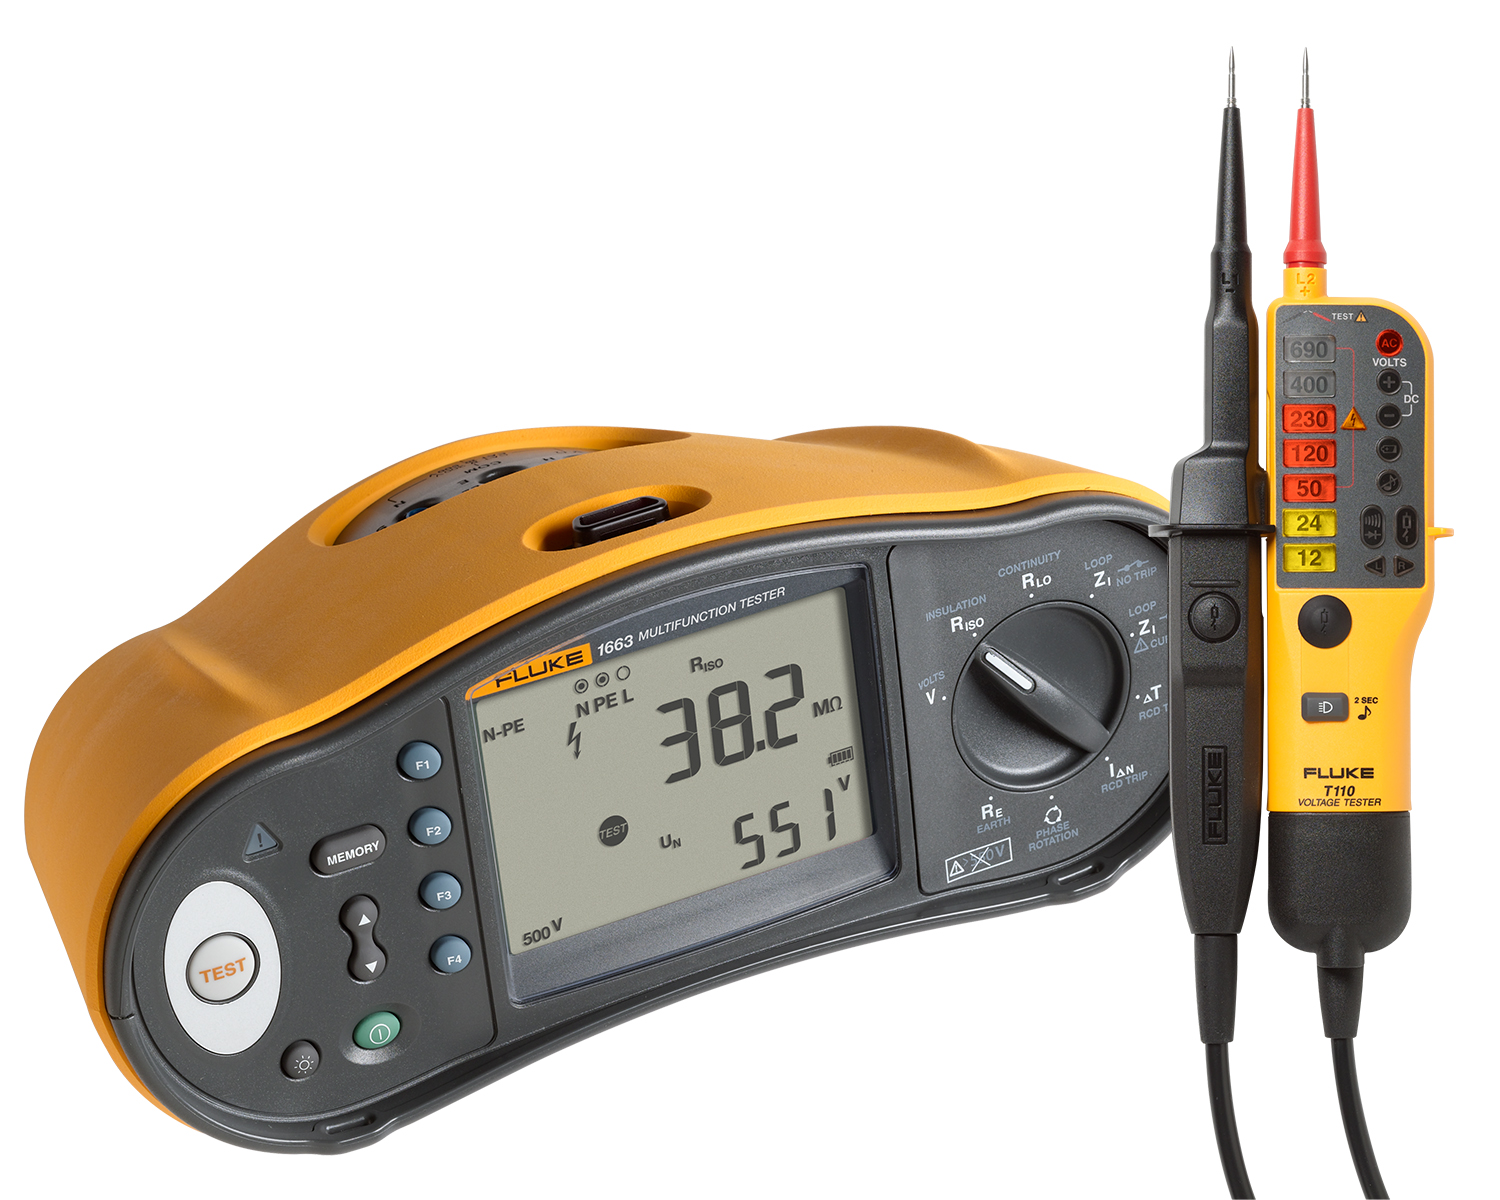 Fluke 1663 Multifunction Installation Tester plus a T110 Voltage and Continuity Tester